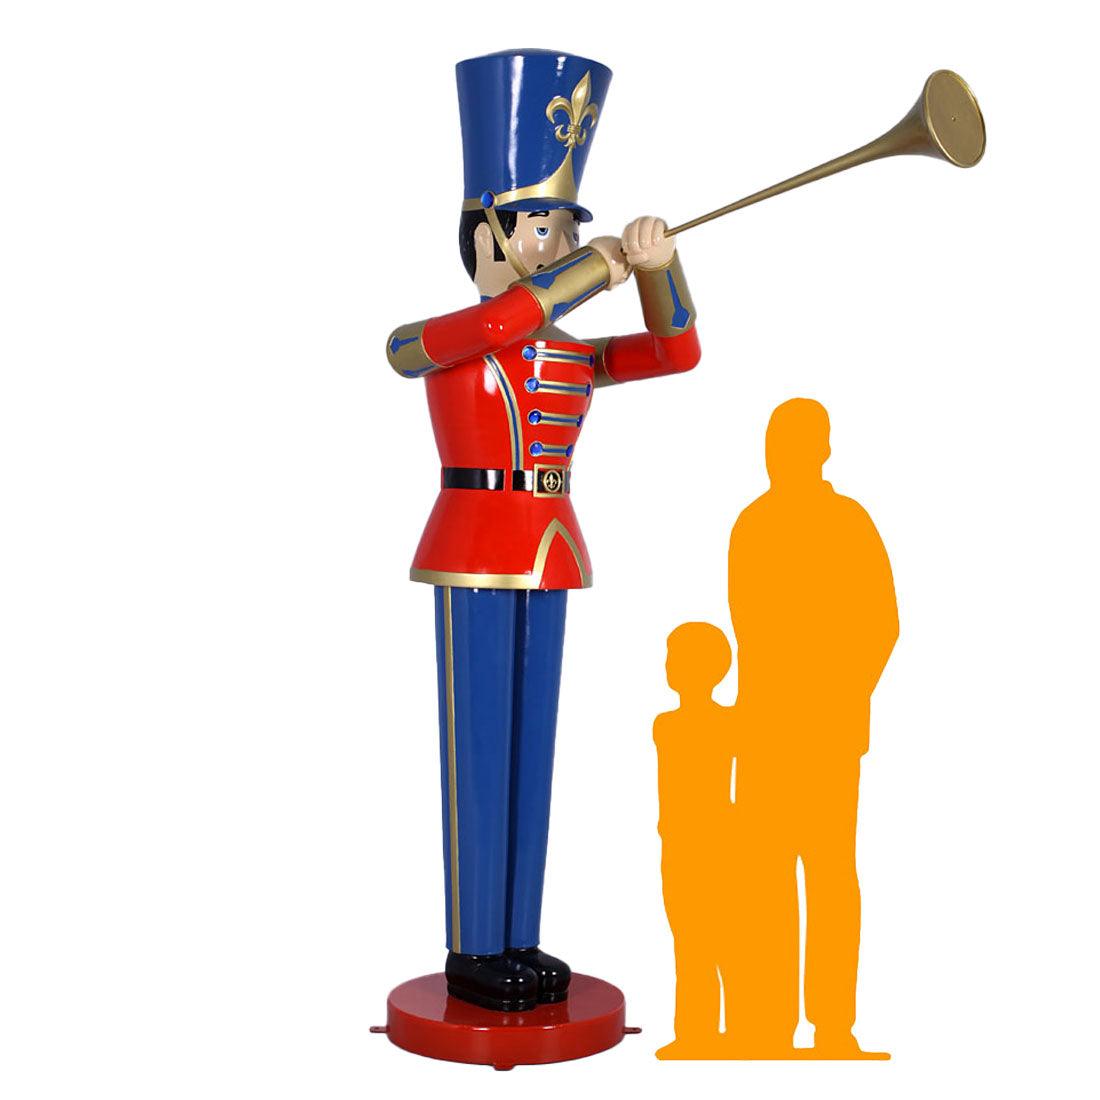 Large Red Trumpet Toy Soldier Statue - LM Treasures Prop Rentals 